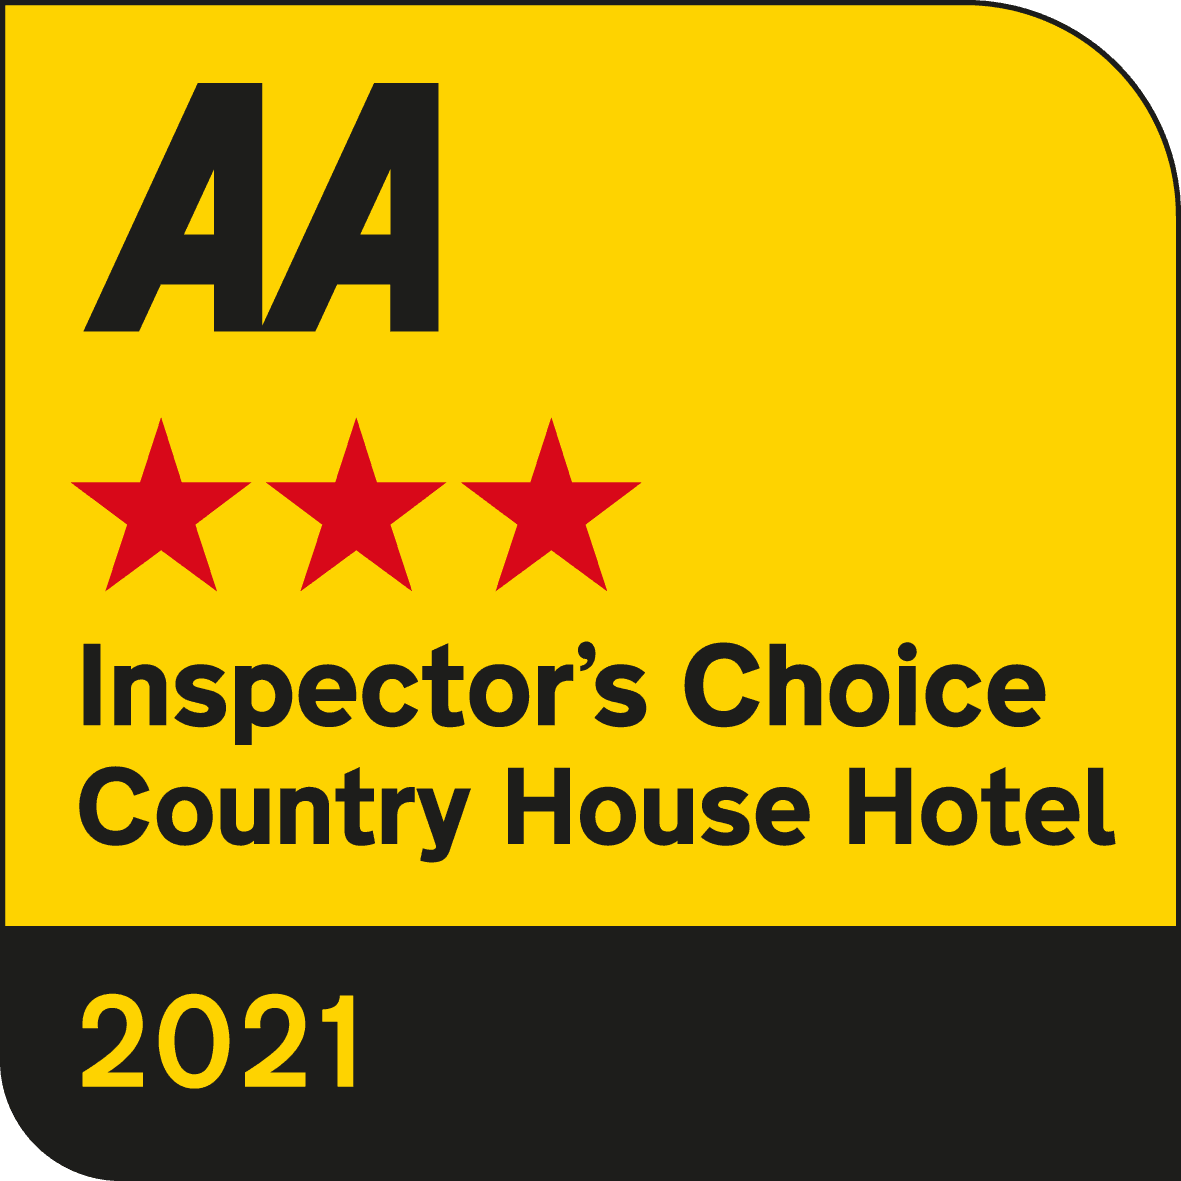 AA 3 Red Star Hotel 2021